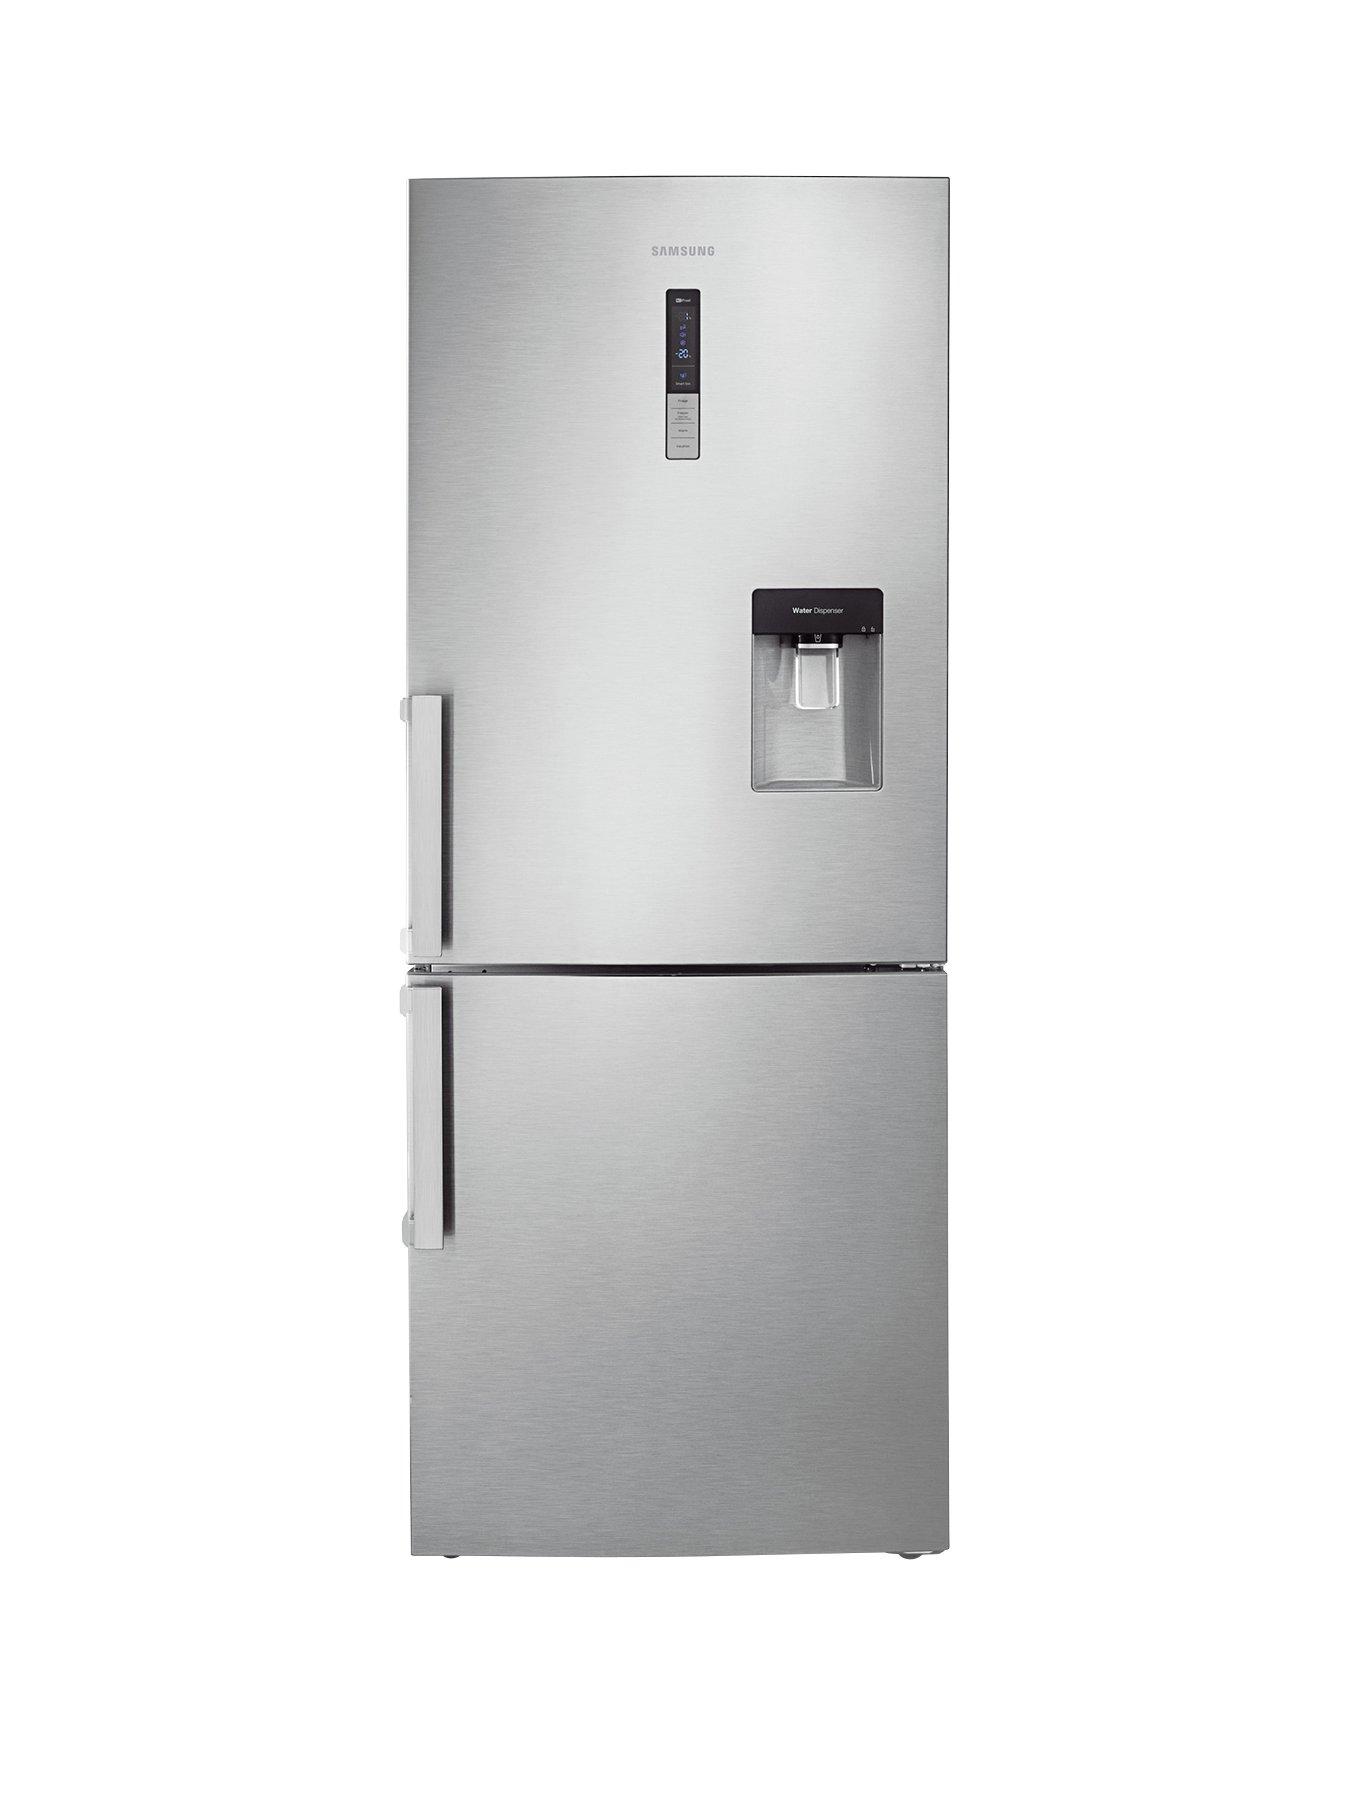 Samsung Rl4362Fbasl/Eu 70Cm No Frost Fridge Freezer With Spacemax Technology And 5 Year Samsung Parts And Labour Warranty – Silver